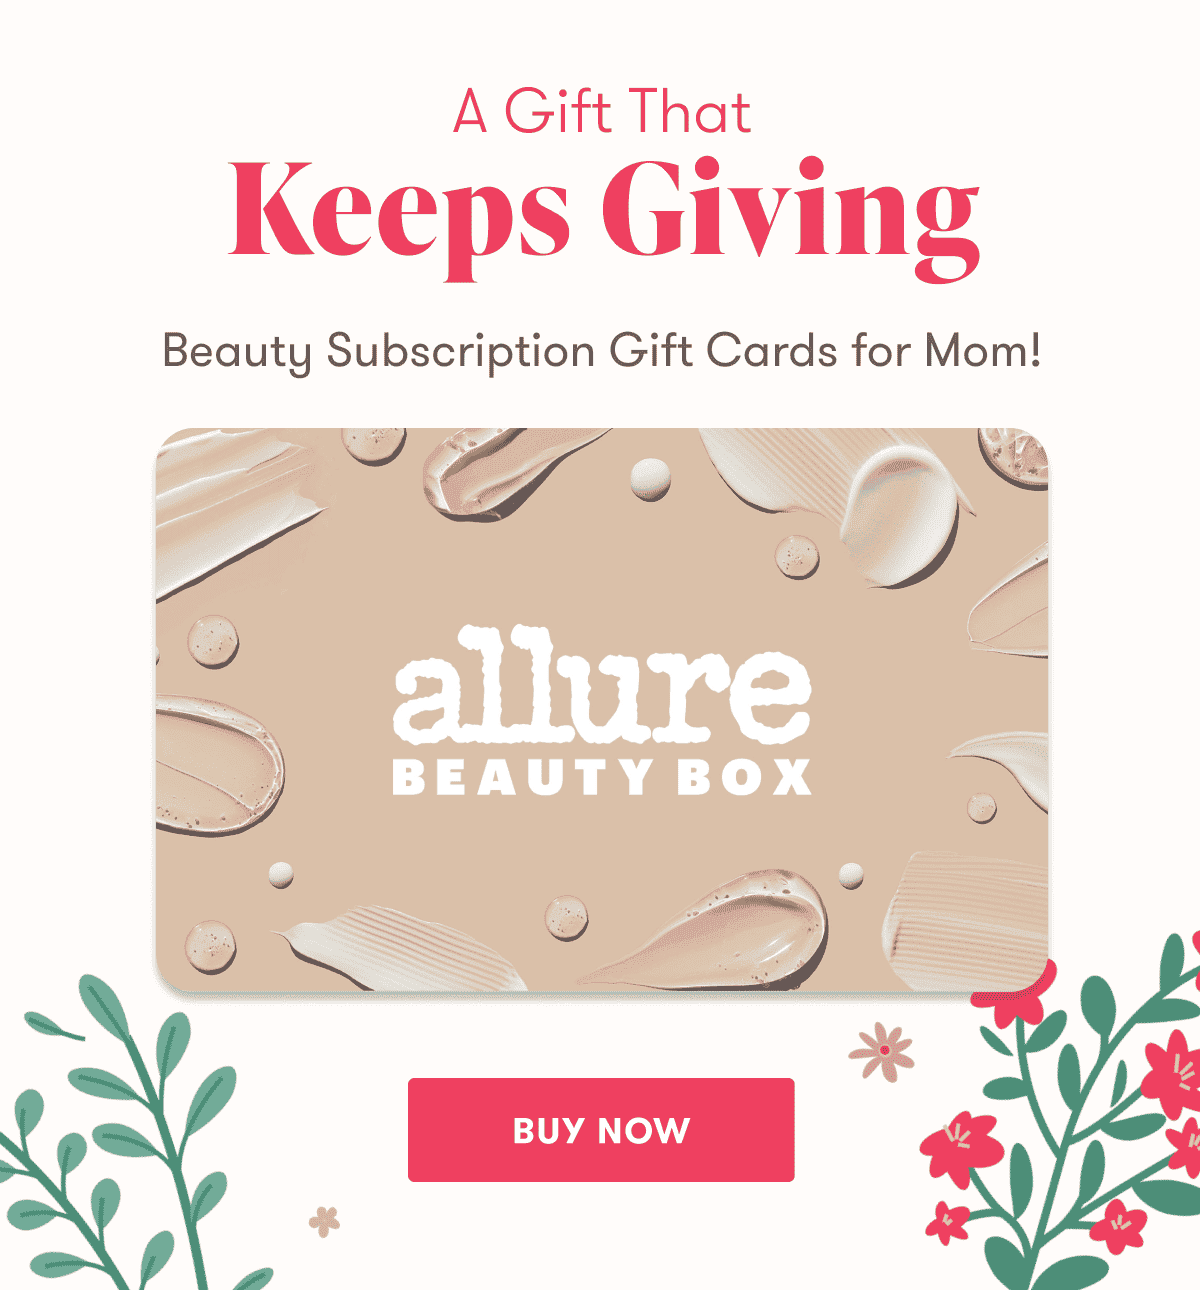 A Gift That Keeps Giving. Beauty Subscription Gift Cards for Mom! Buy now.